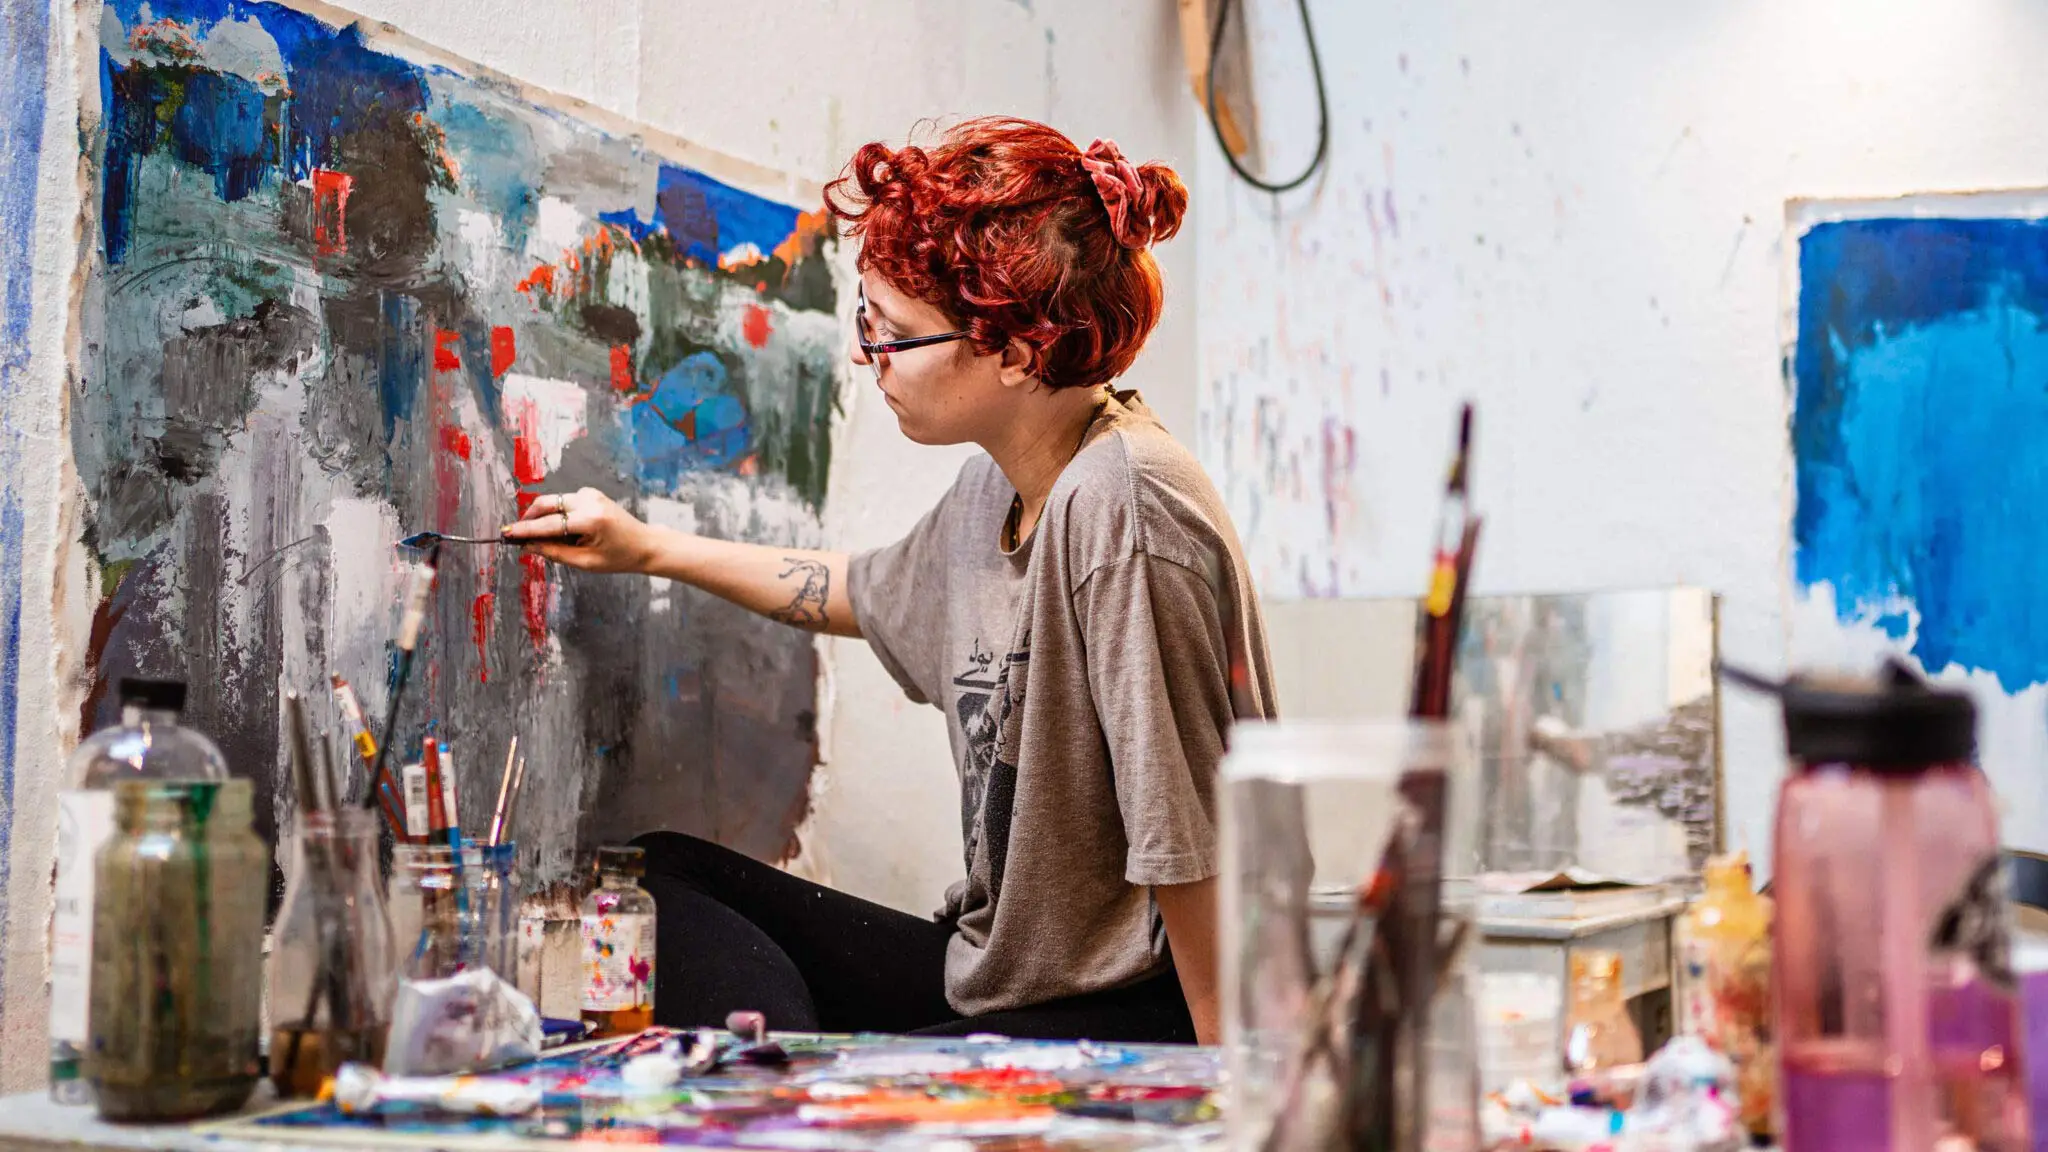 An art student works on a painting in a studio during class in Spruance Hall.